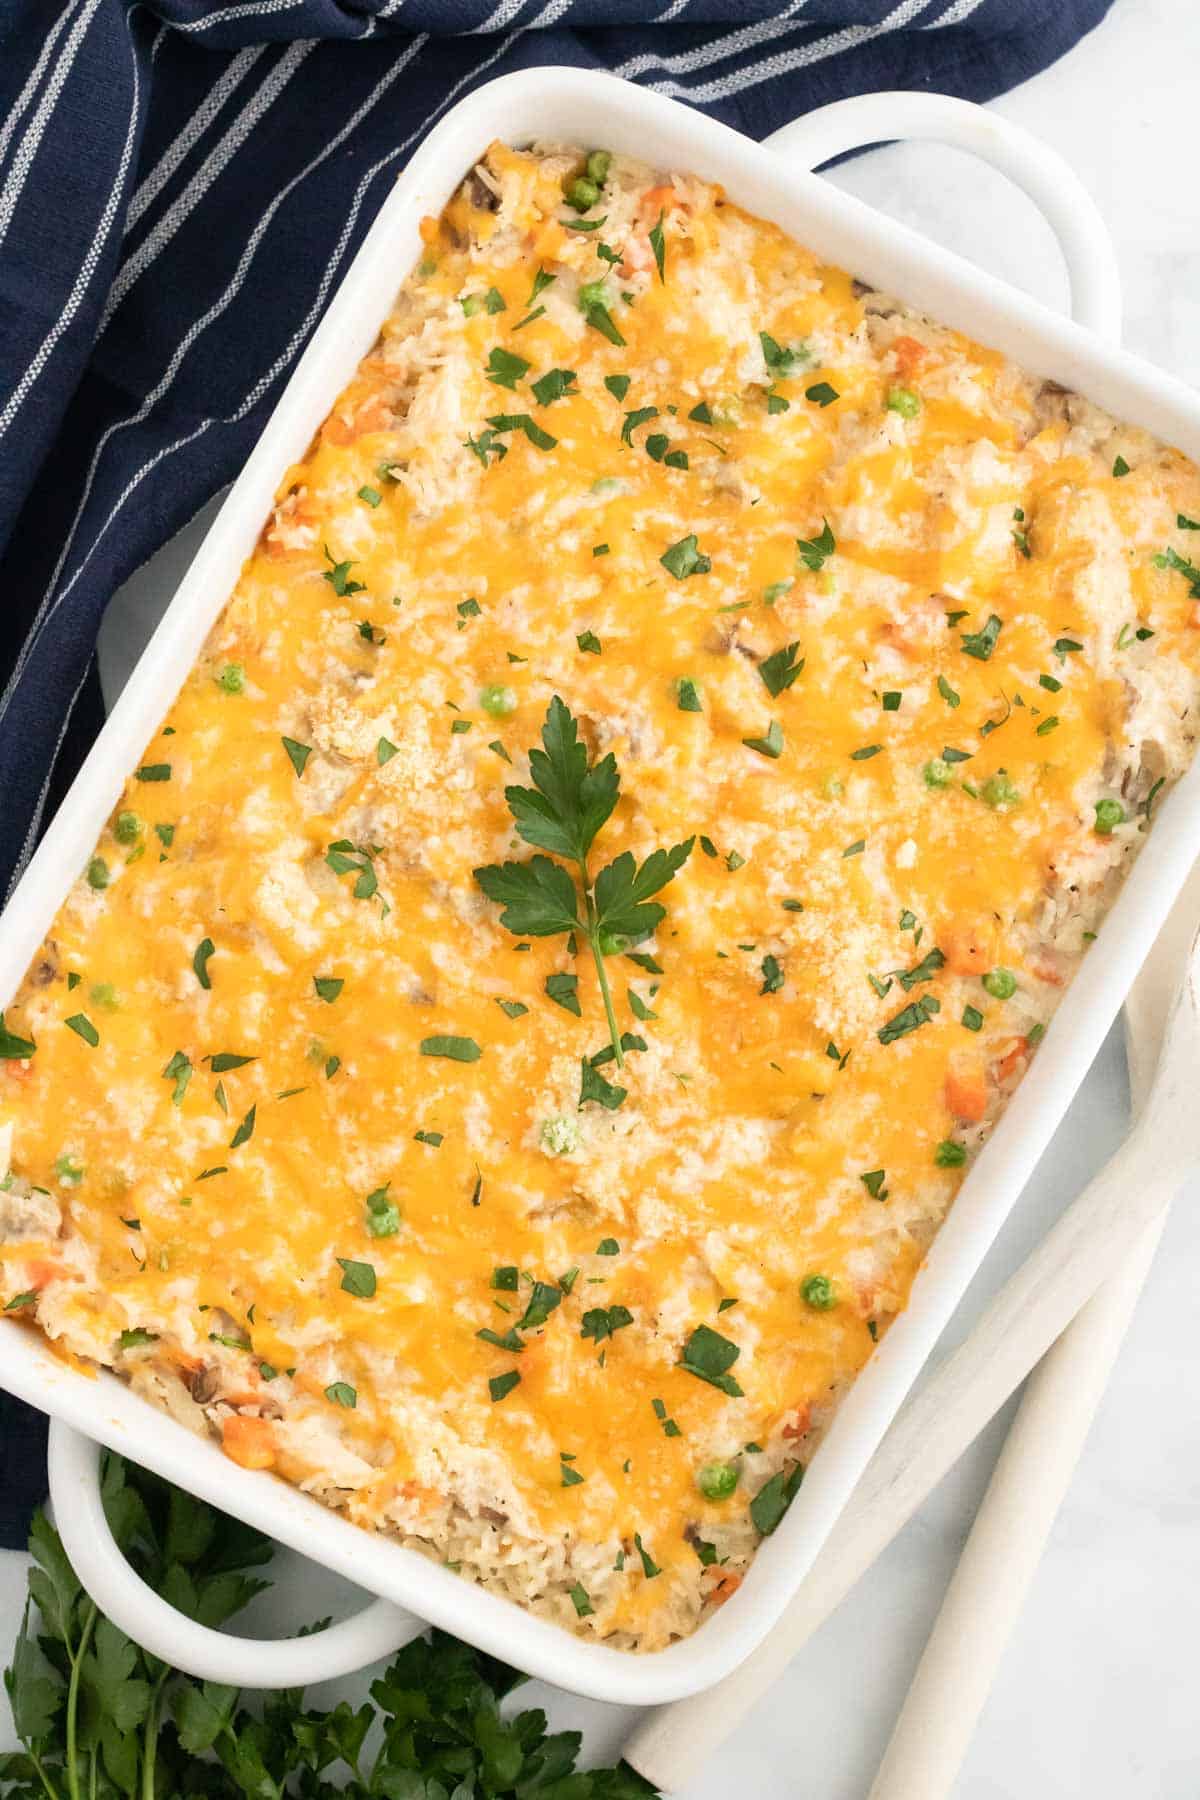 Top view of a baked chicken and rice casserole.